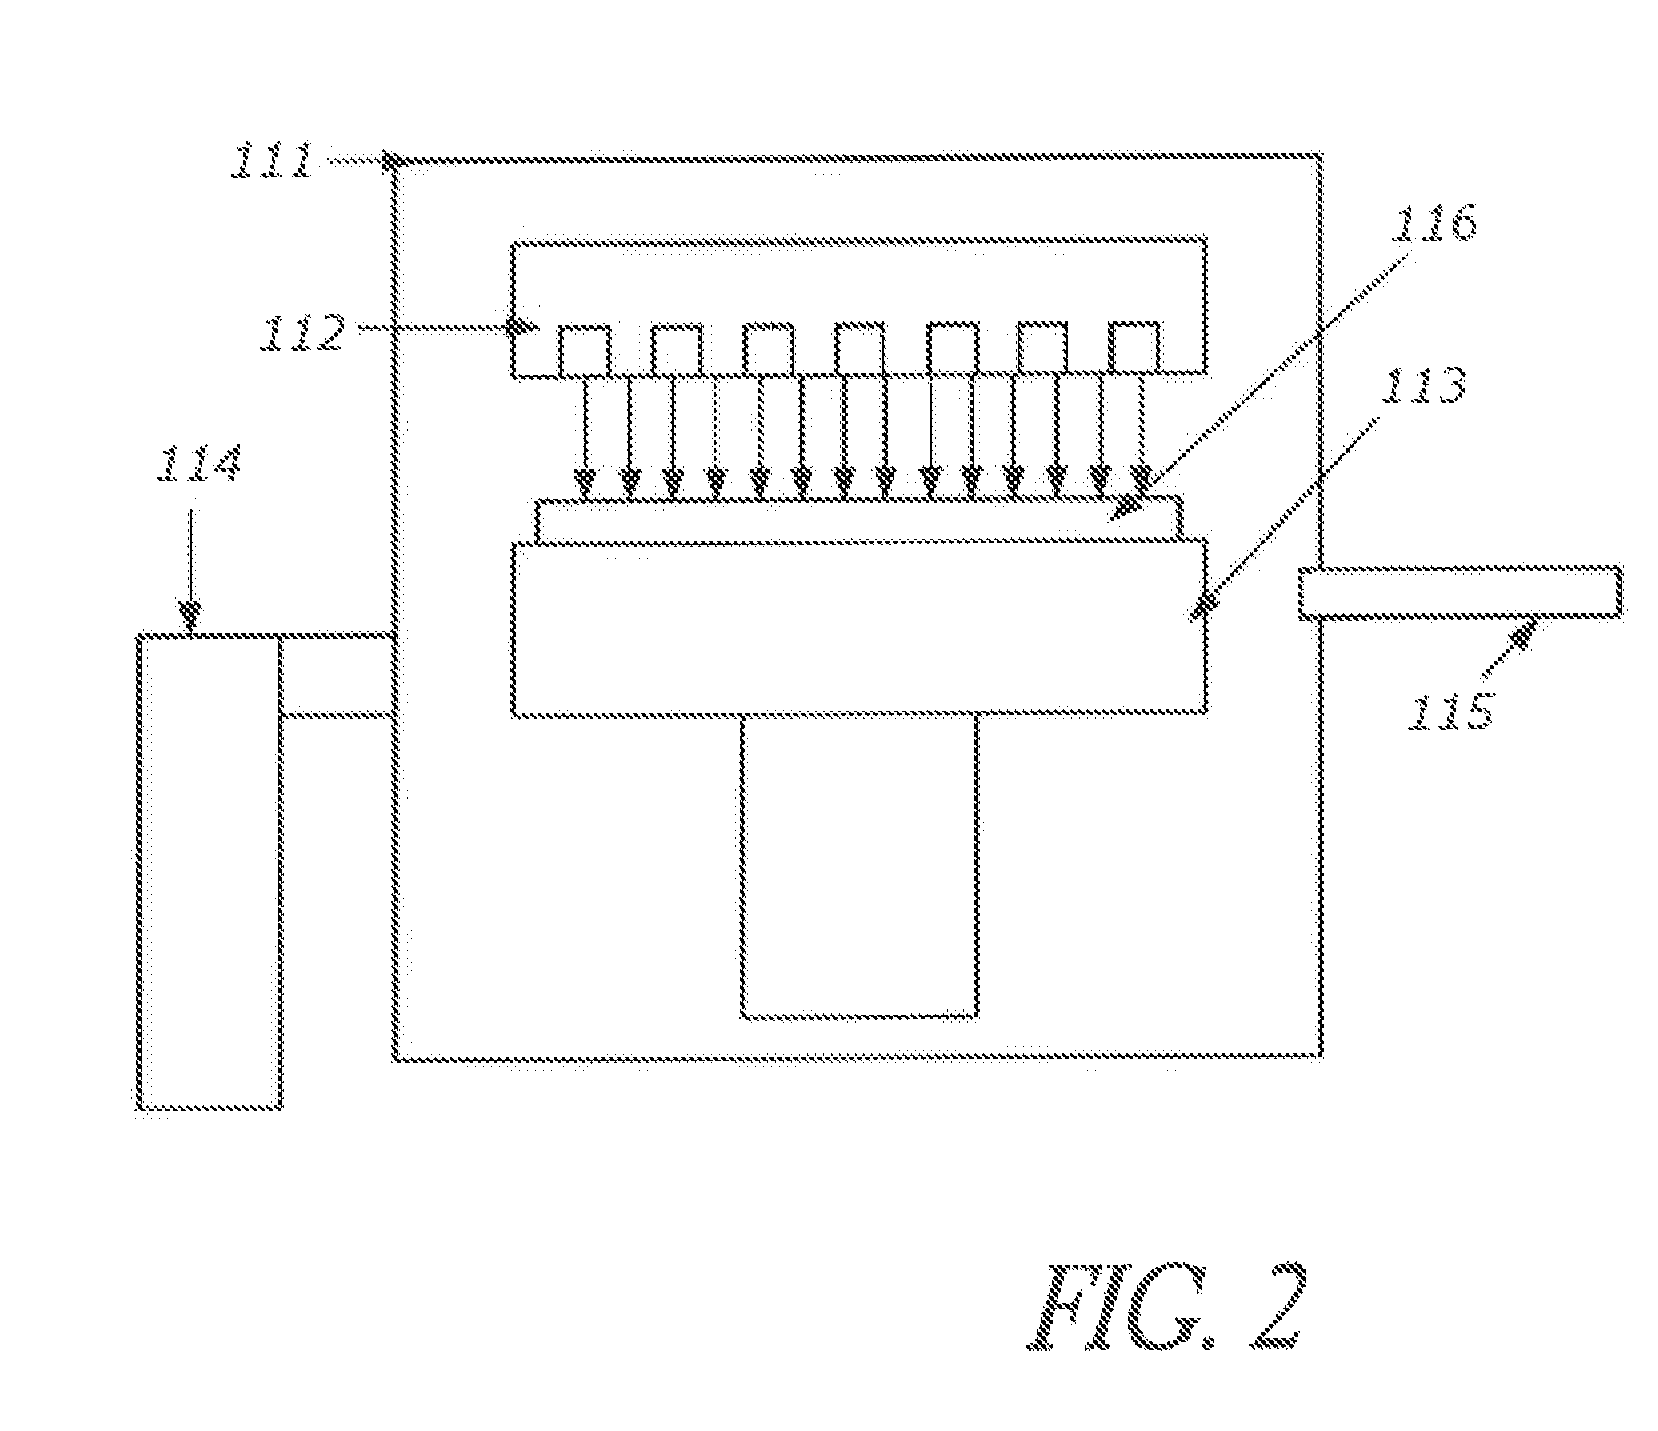 Method for Forming Conformal, Homogeneous Dielectric Film by Cyclic Deposition and Heat Treatment